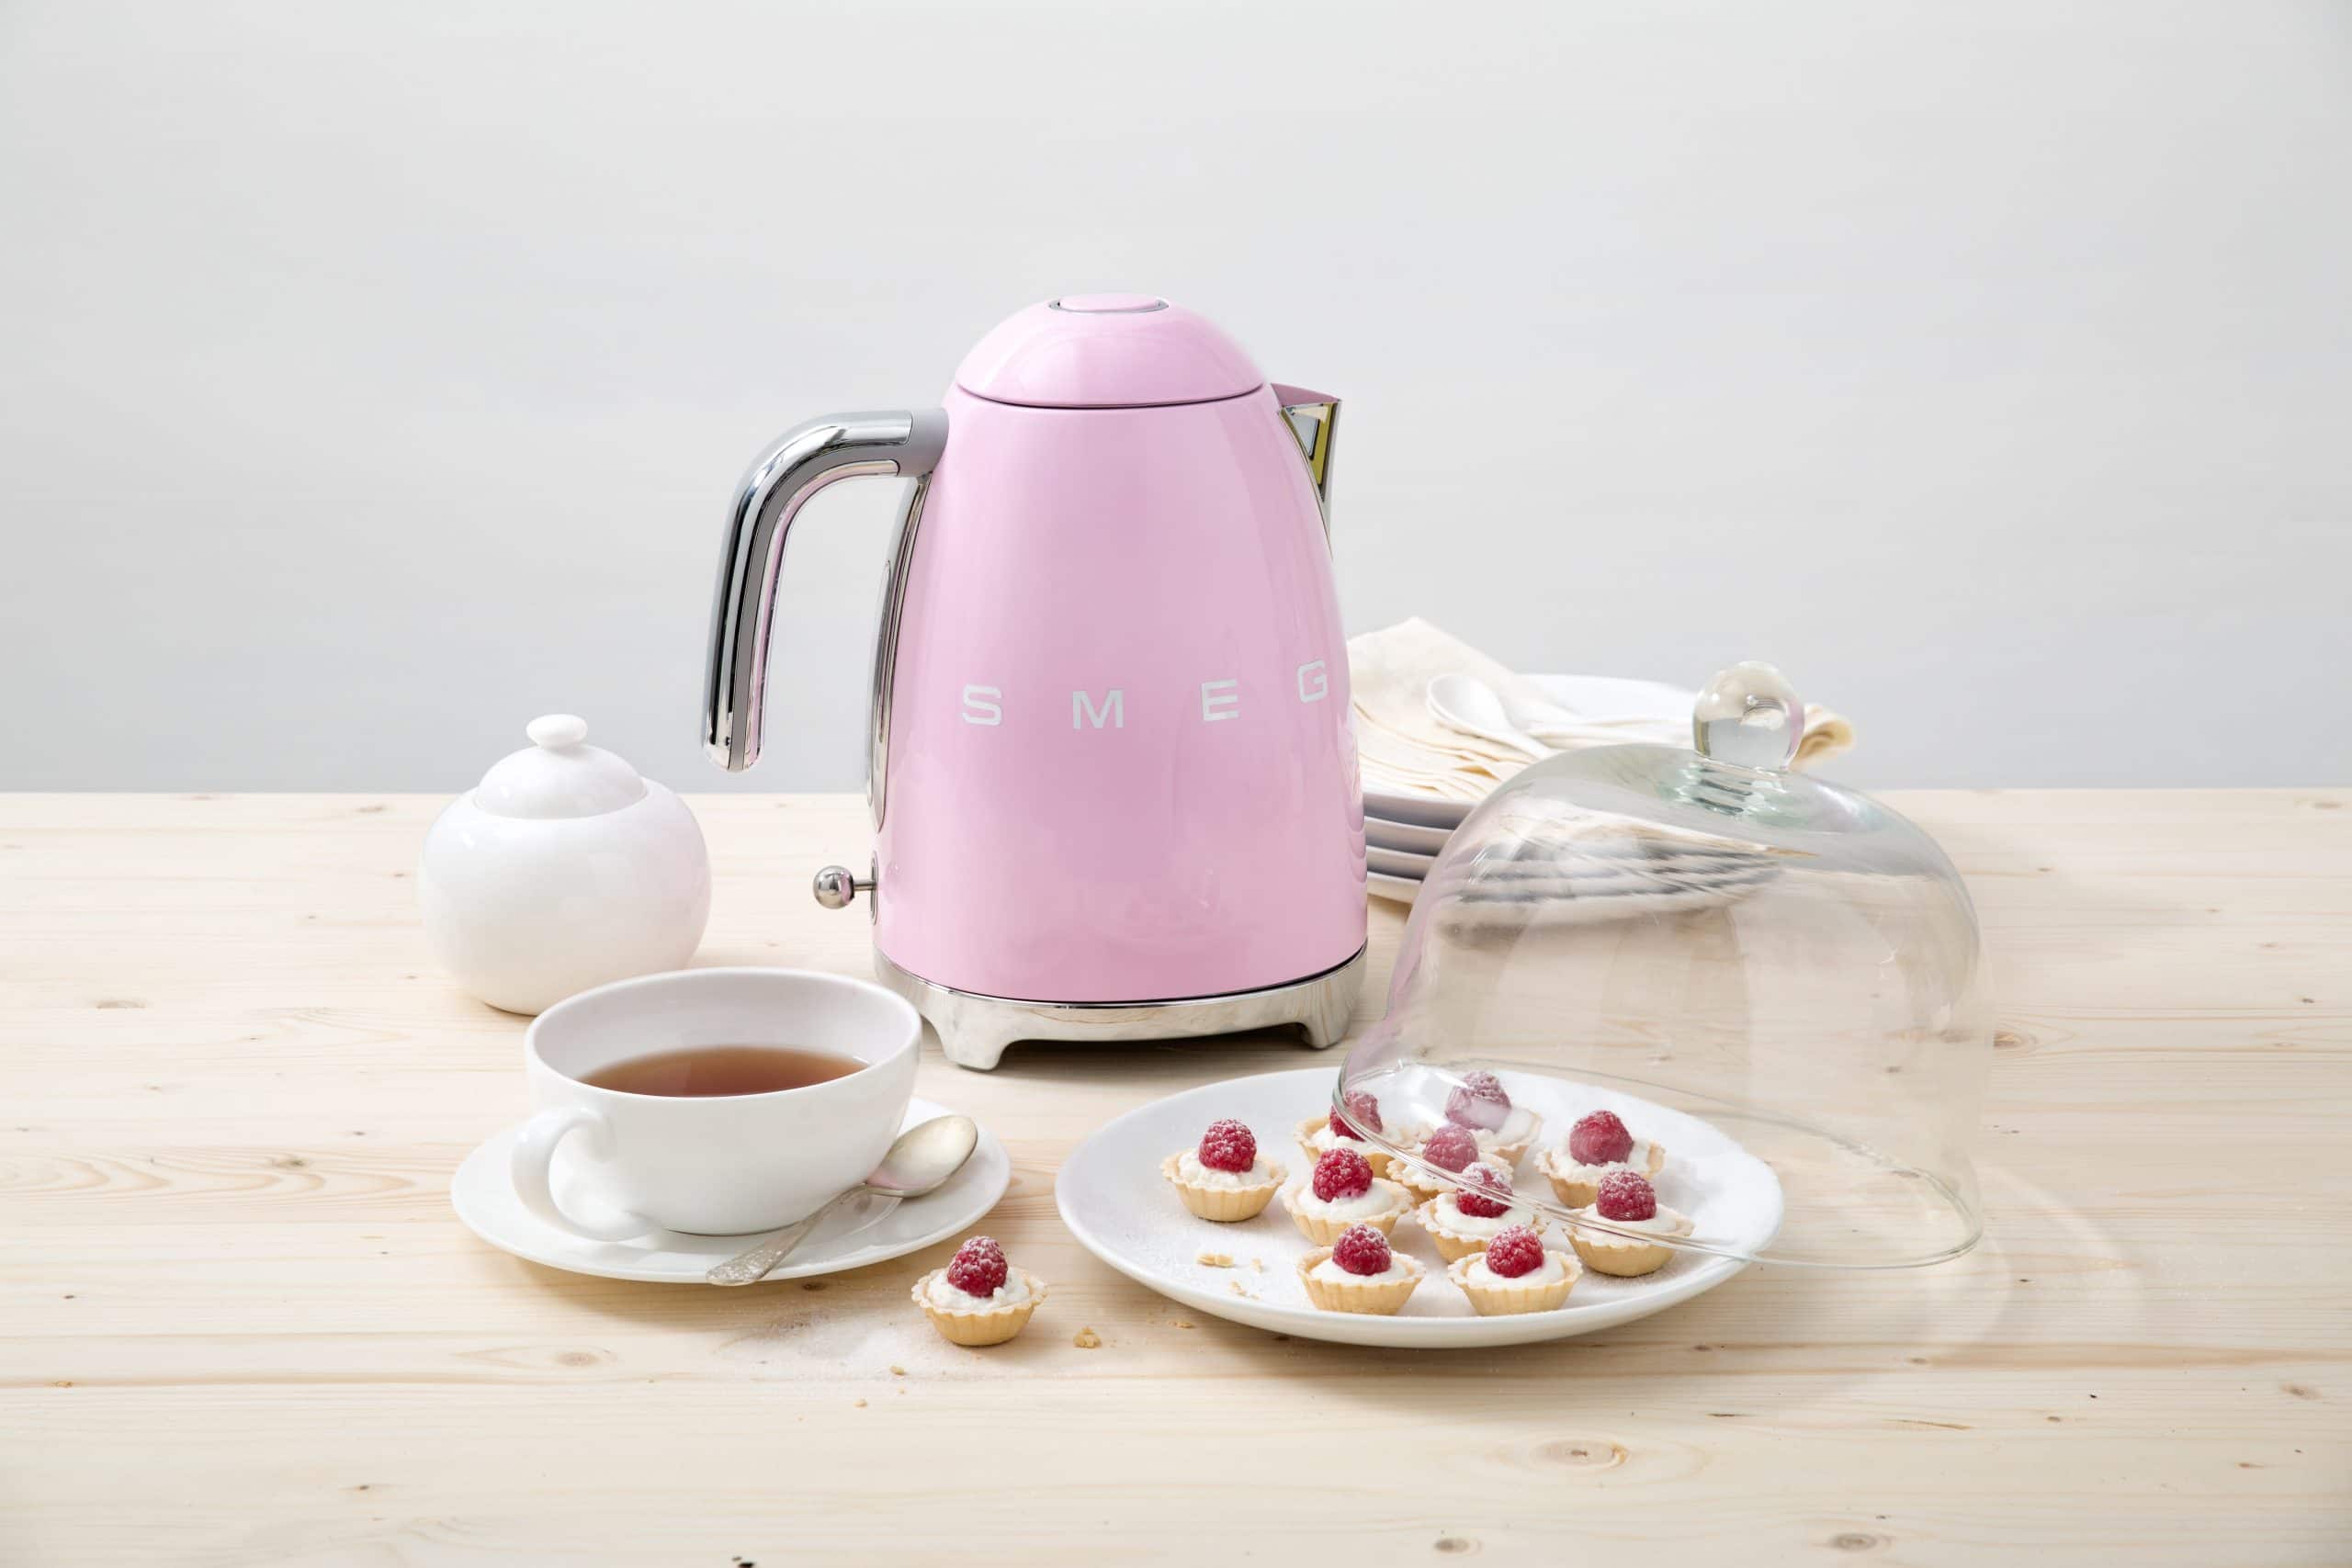 Smeg 50’s Style VT Kettle 1.7 Ltrs with Keep Warm Option, Steel